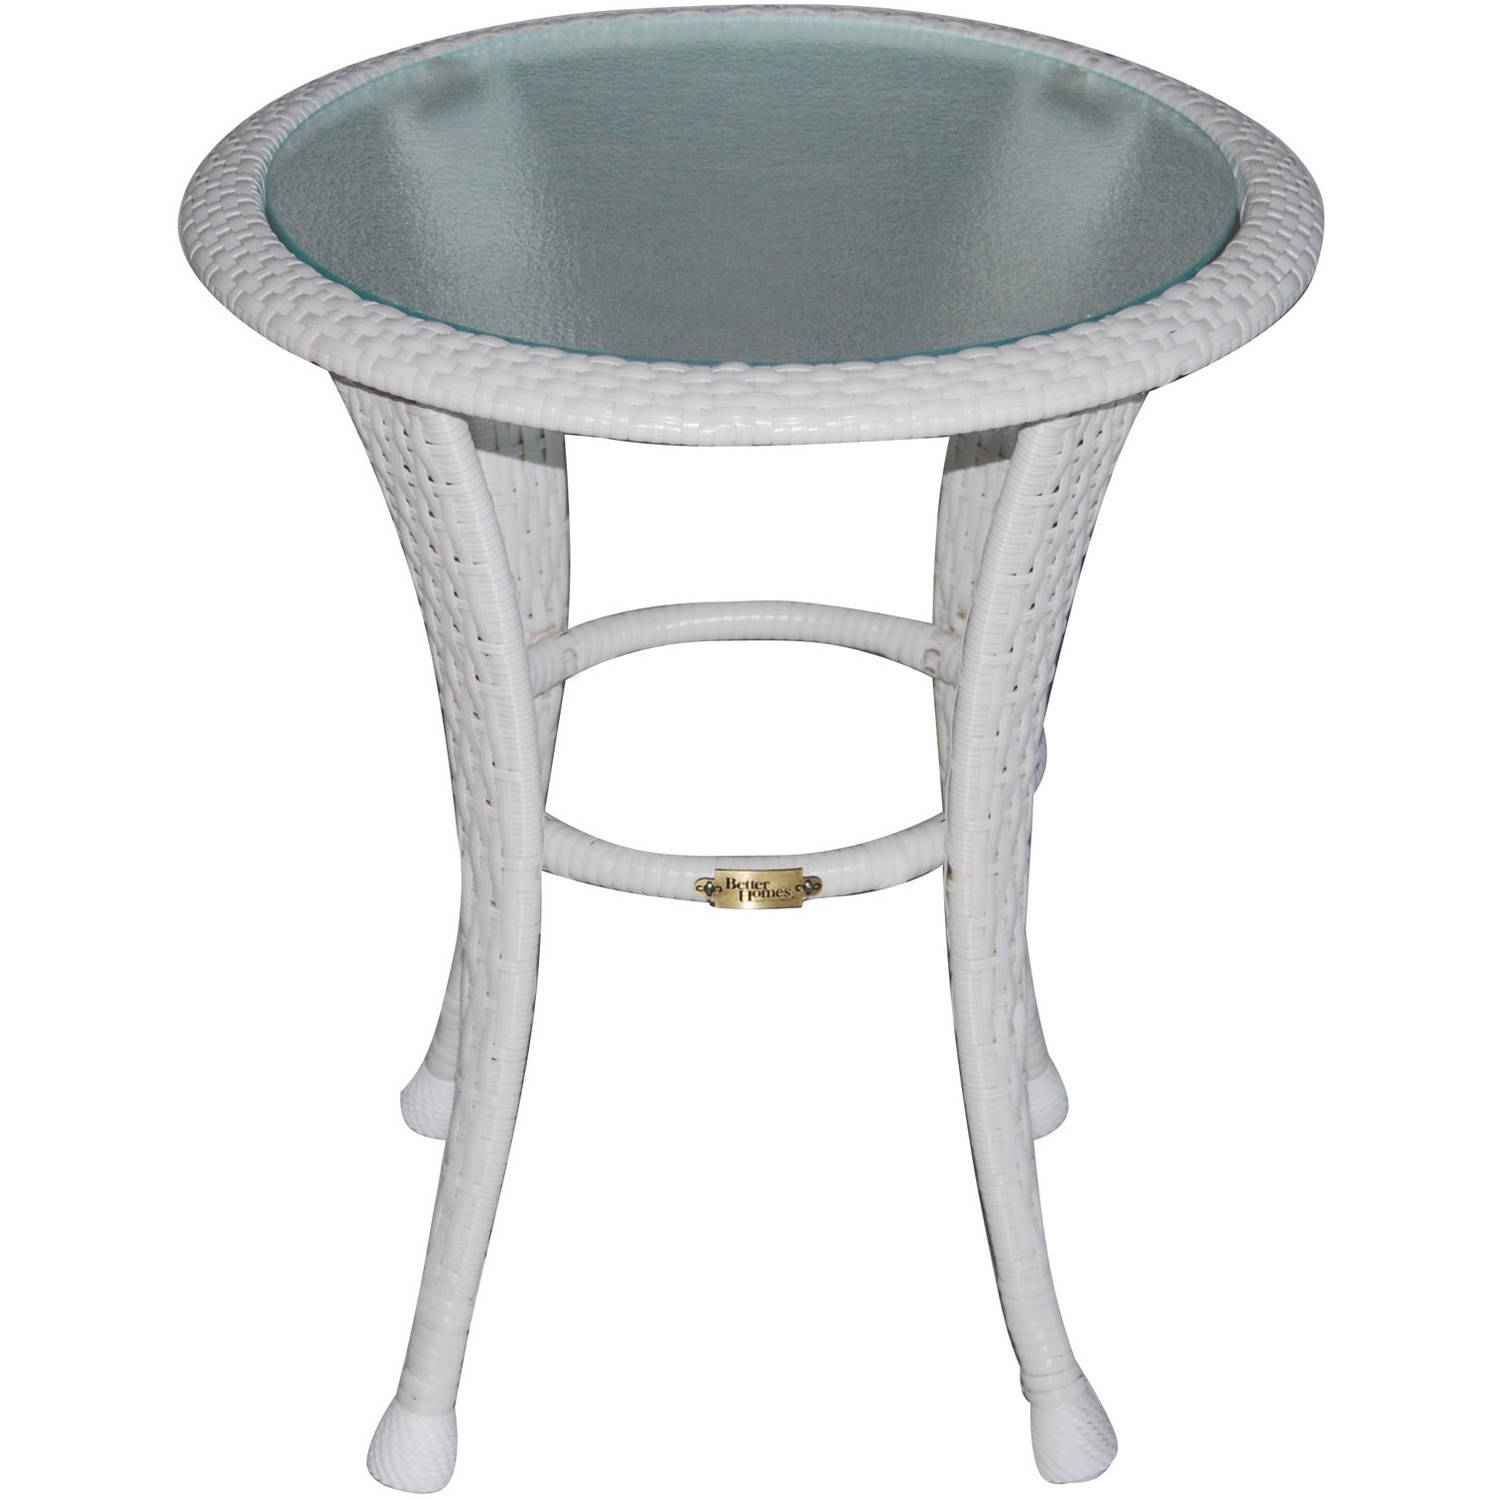 outstanding target side table round kmart metal silver upcycled tabl white woodworking dark and glass rustic emperor legs cleo pedestal wood marblegold argos tablecloth gold plan